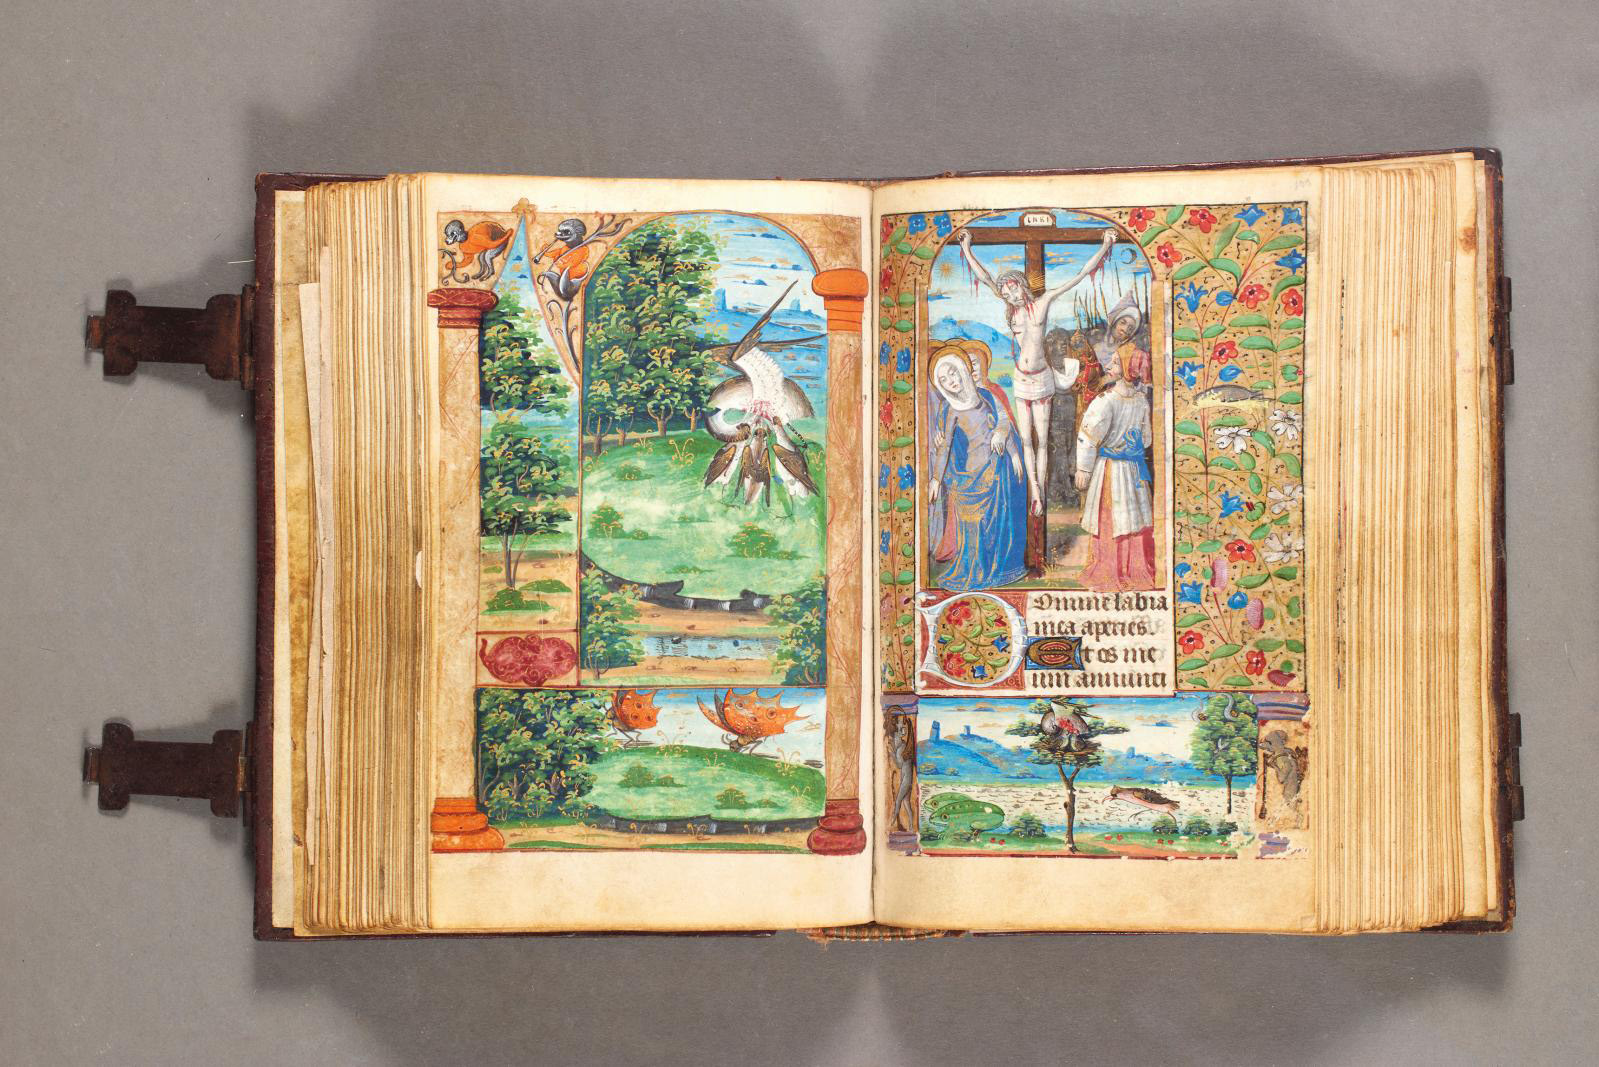 Medieval Illuminated Manuscripts: Beauty and Provenance